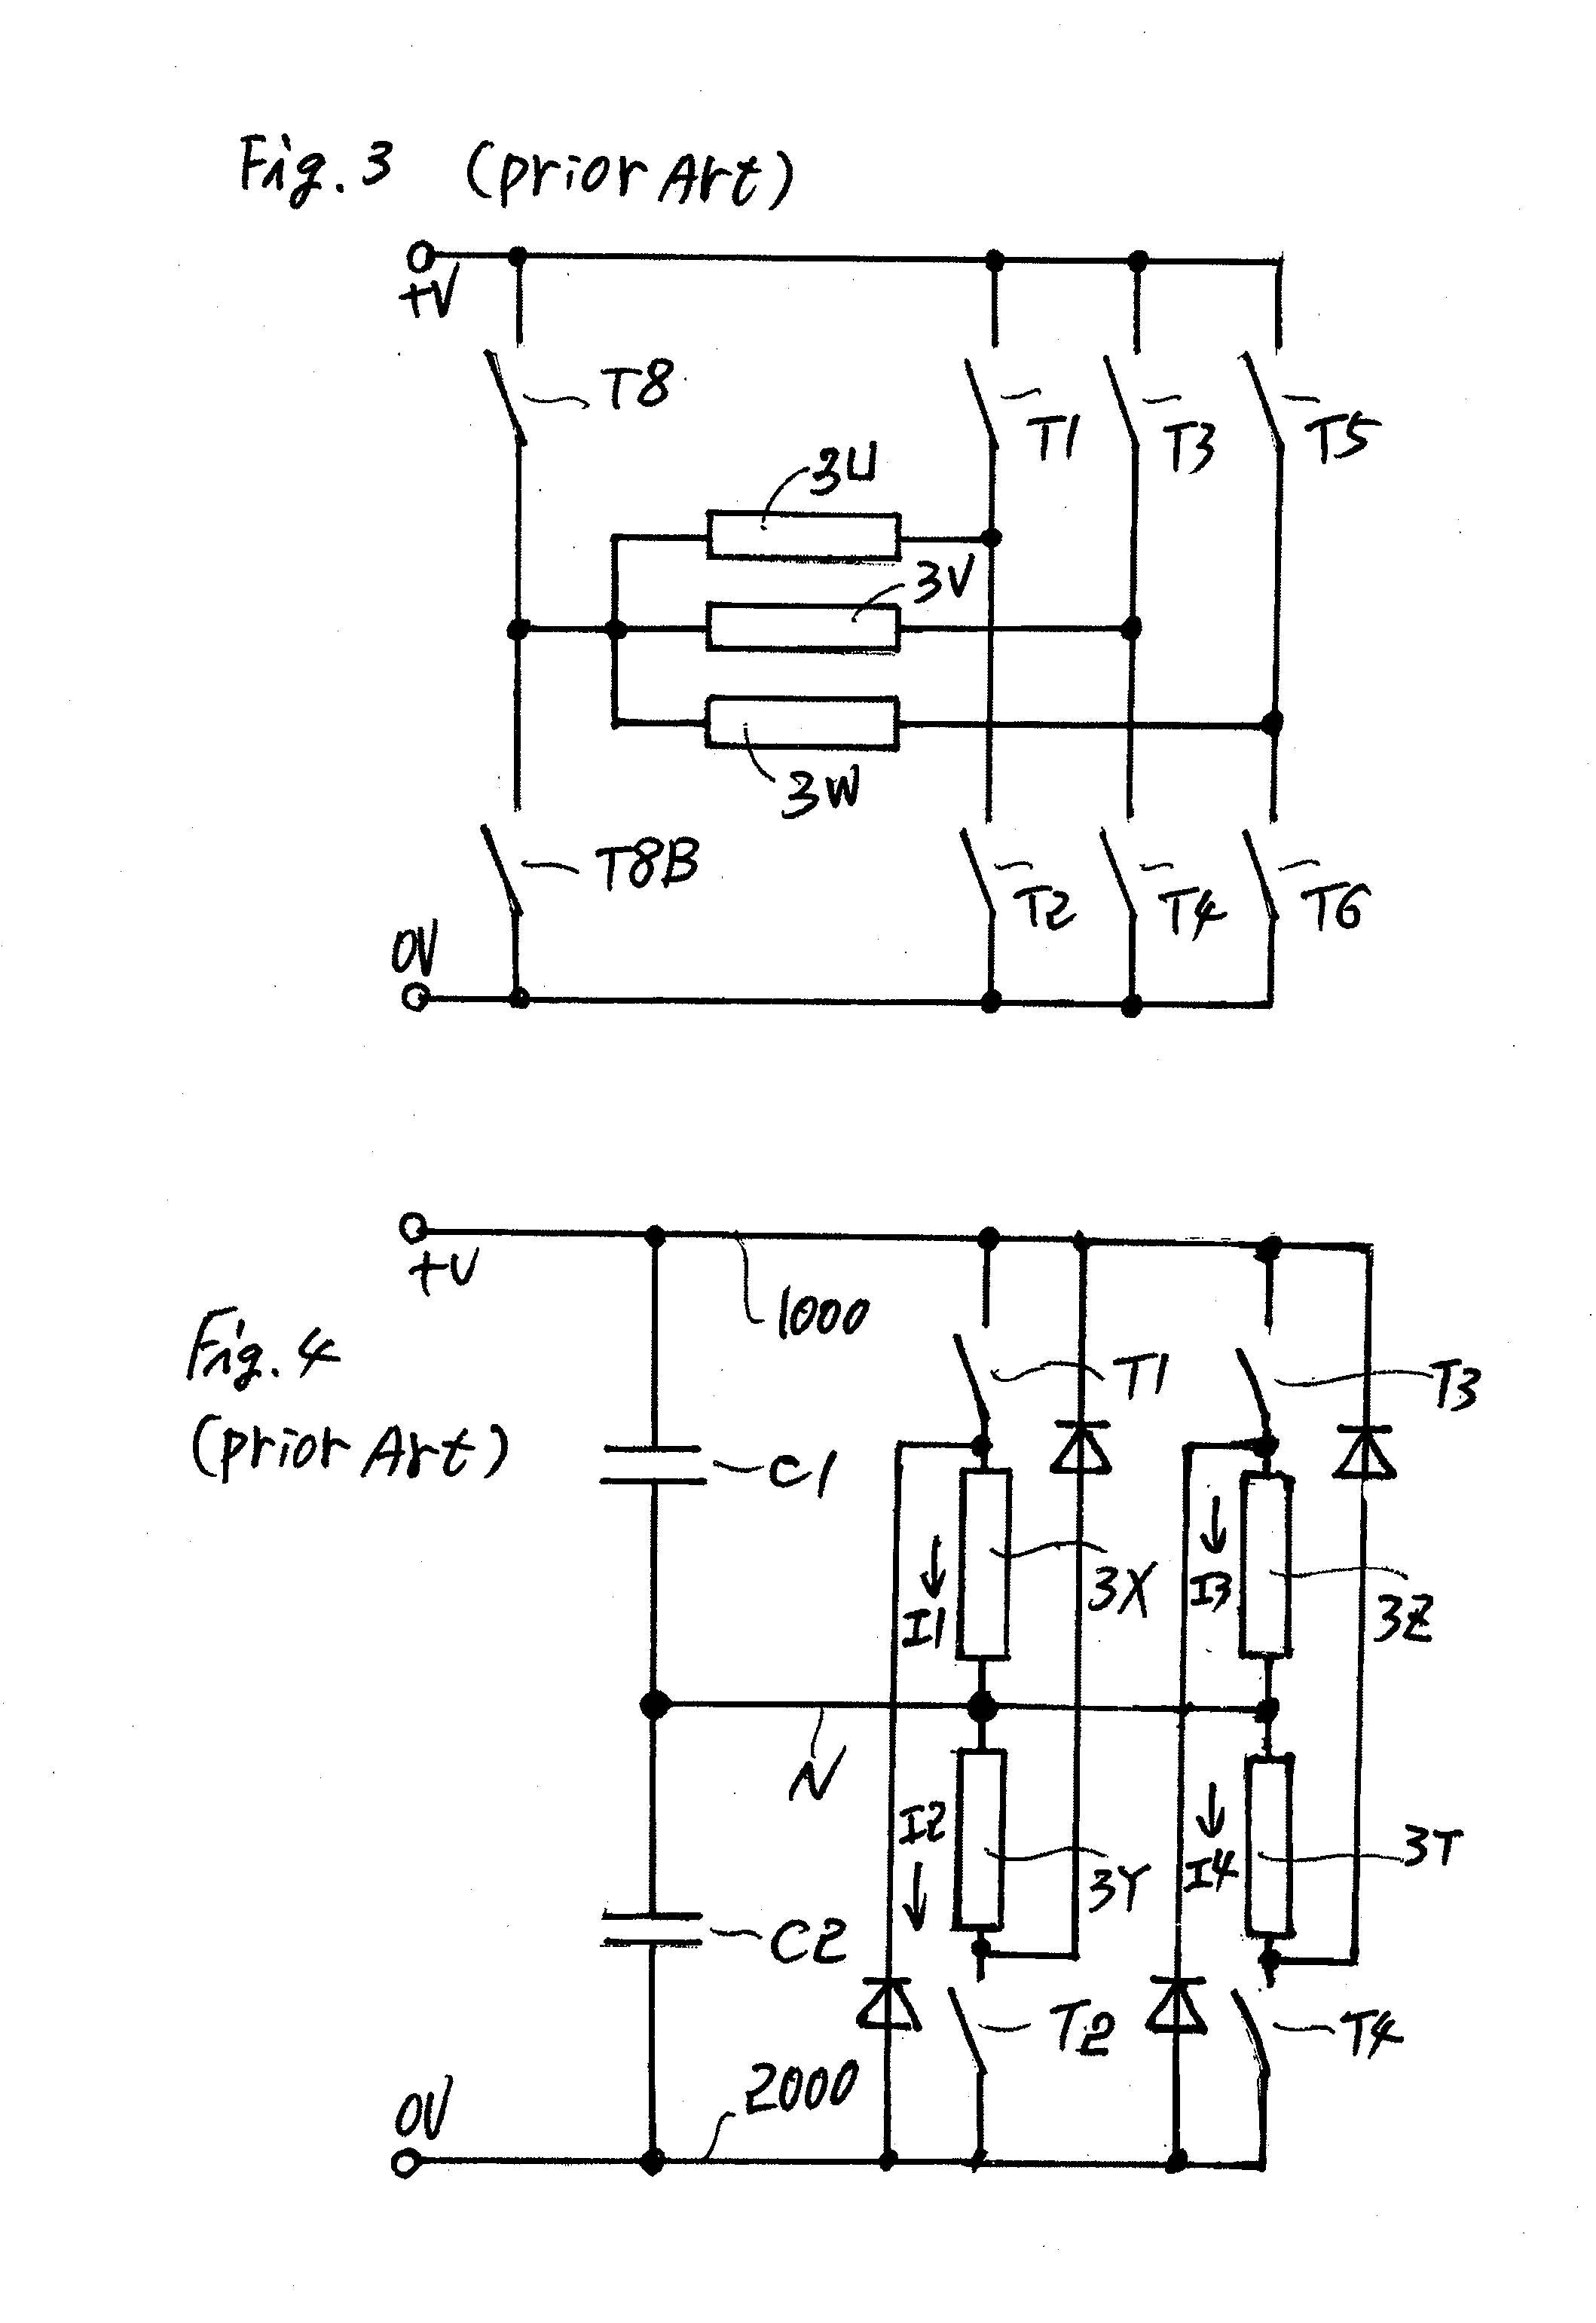 Power converter for driving switched reluctance motor